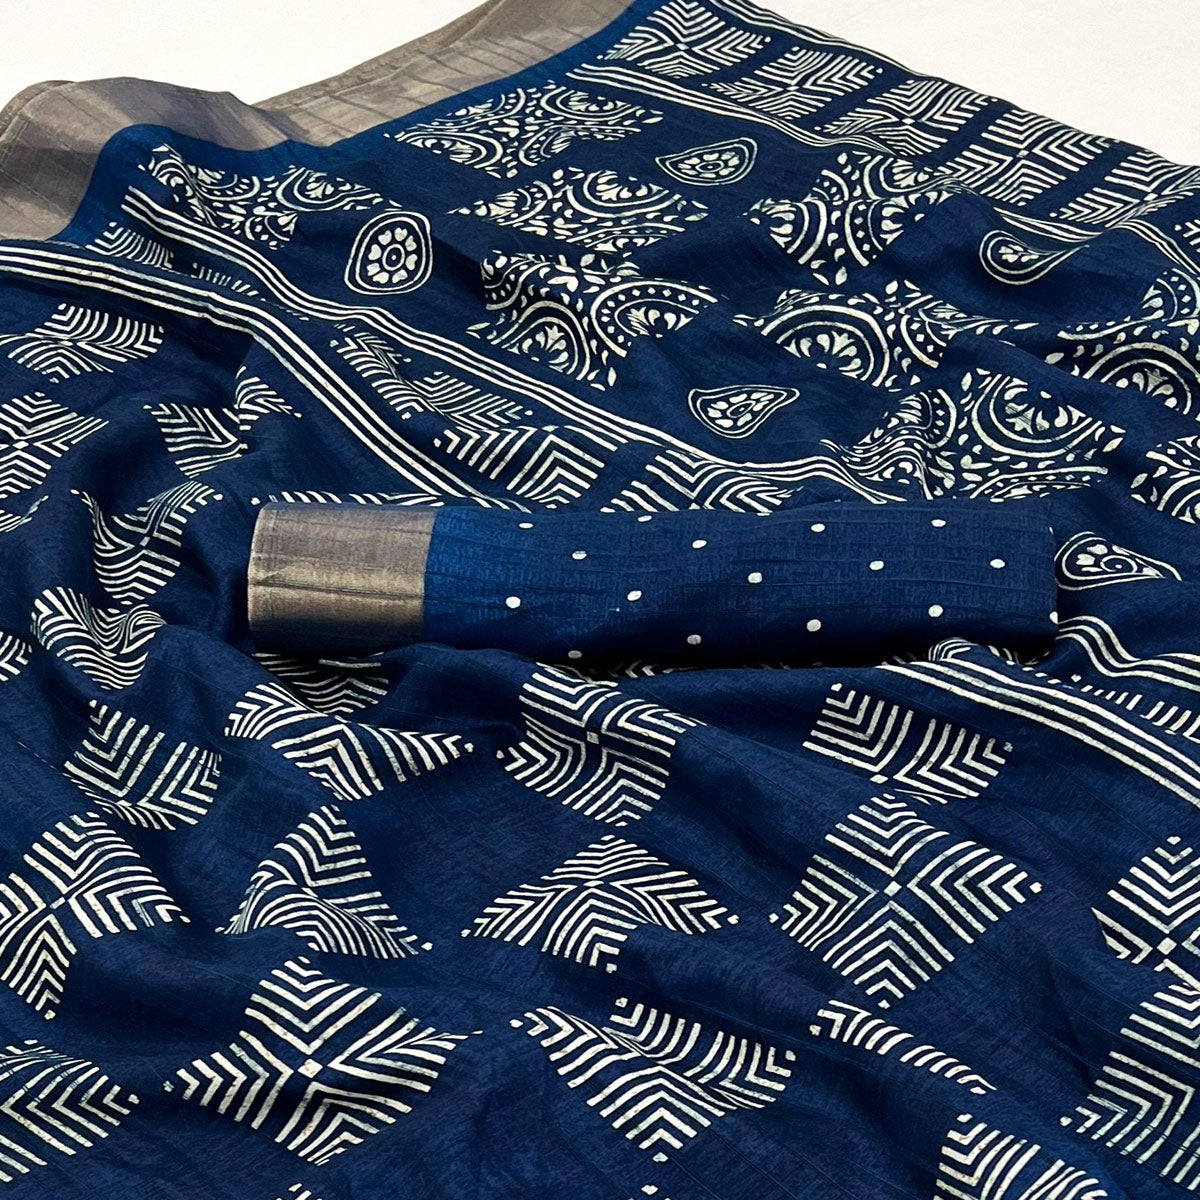 Blue Printed Cotton Blend Saree With Woven Border